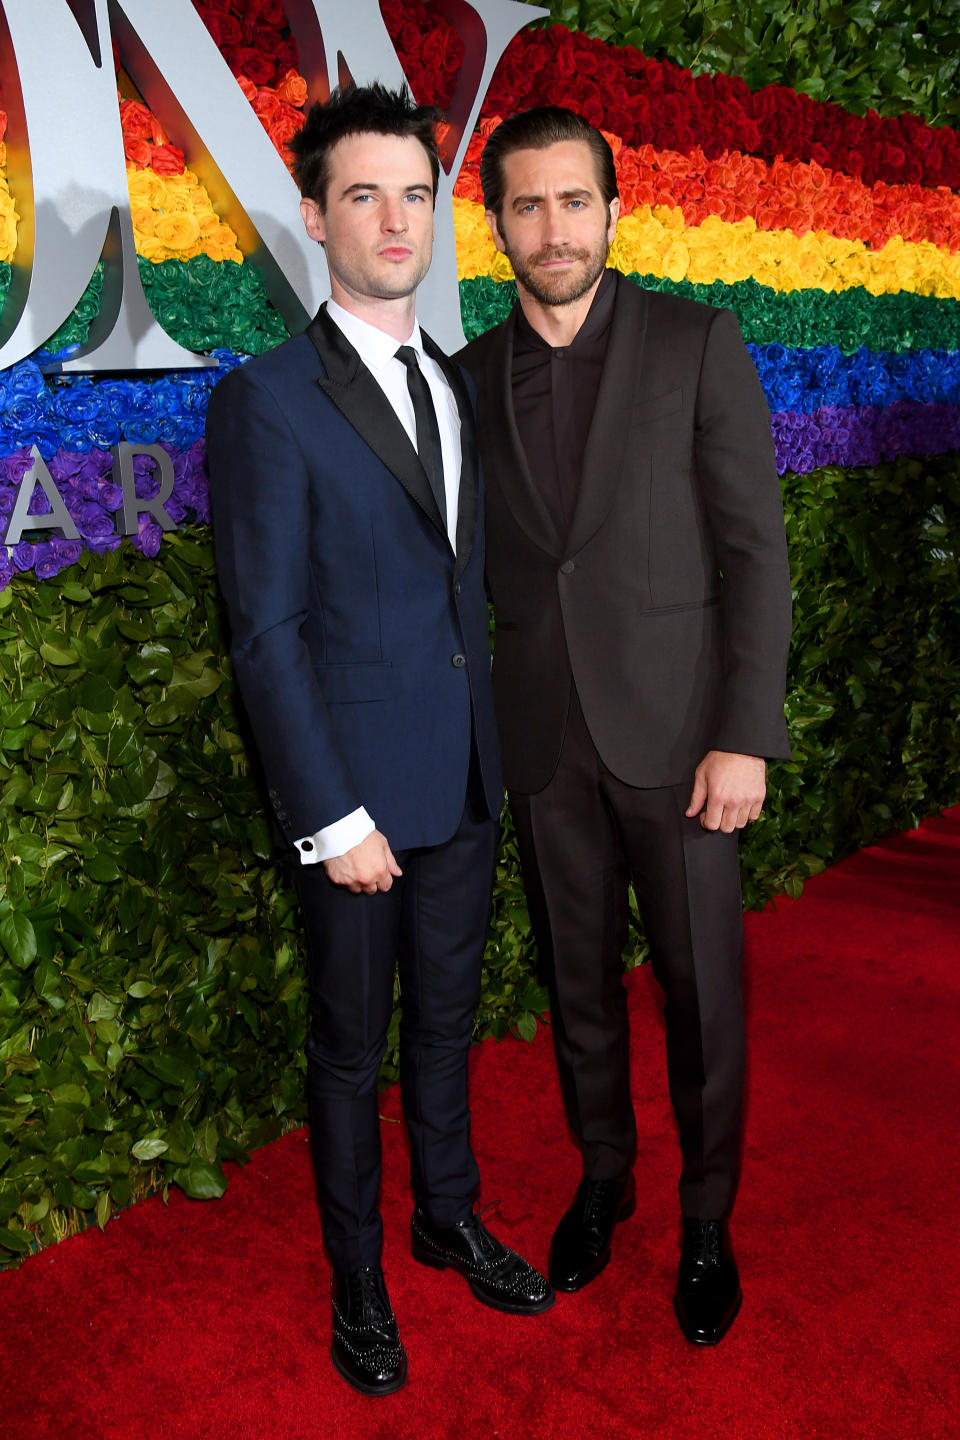 NEW YORK, NEW YORK - JUNE 09: Tom Sturridge (L) and Jake Gyllenhaal attend the 73rd Annual Tony Awards at Radio City Music Hall on June 09, 2019 in New York City. (Photo by Kevin Mazur/Getty Images for Tony Awards Productions)